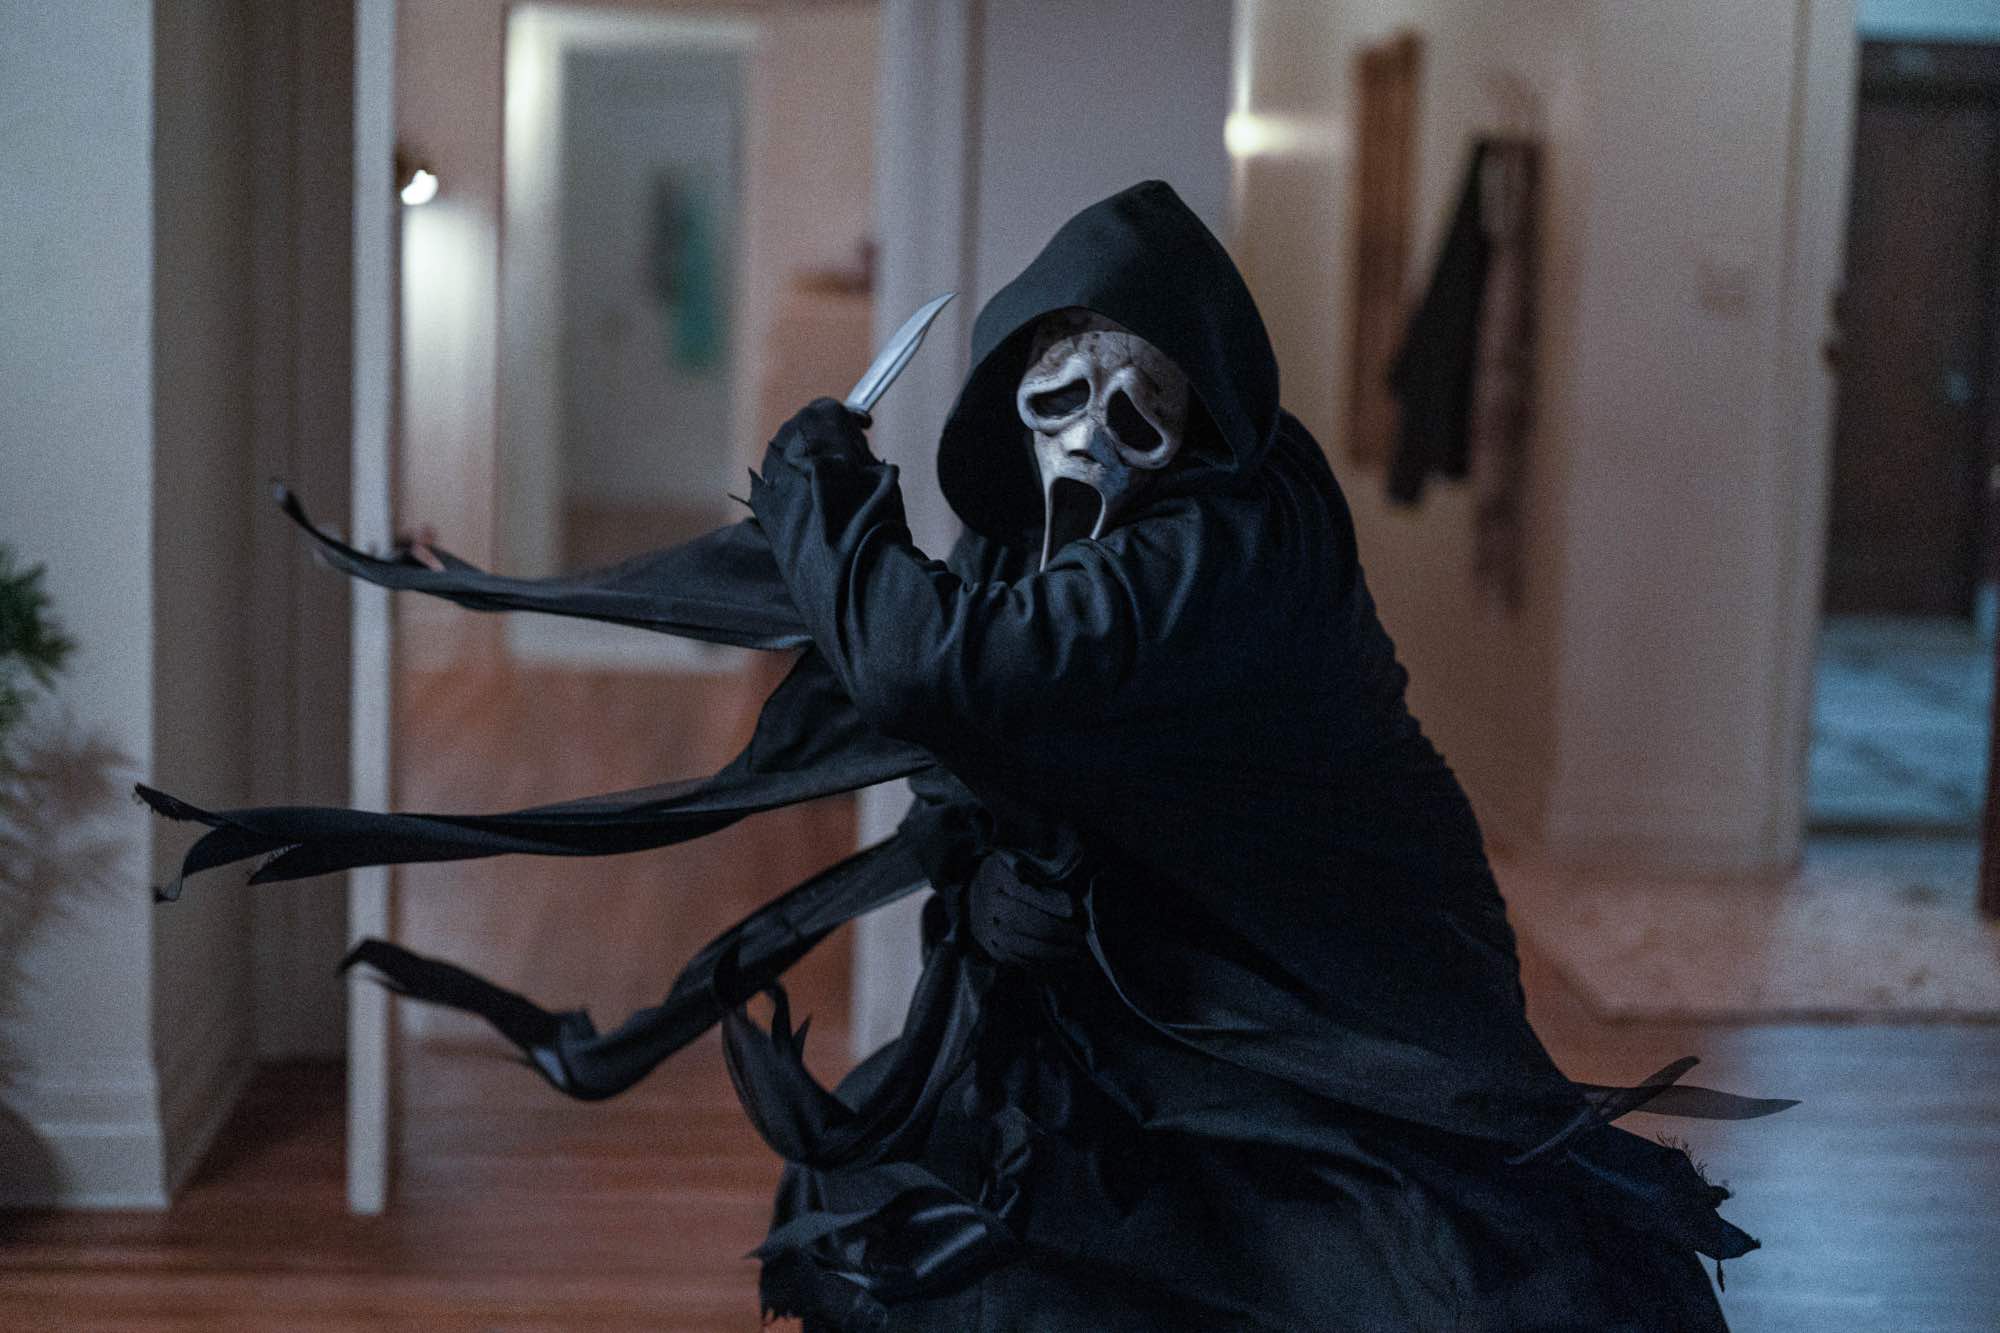 'Scream VI' Ghostface holding a knife, ready to slash in an apartment.